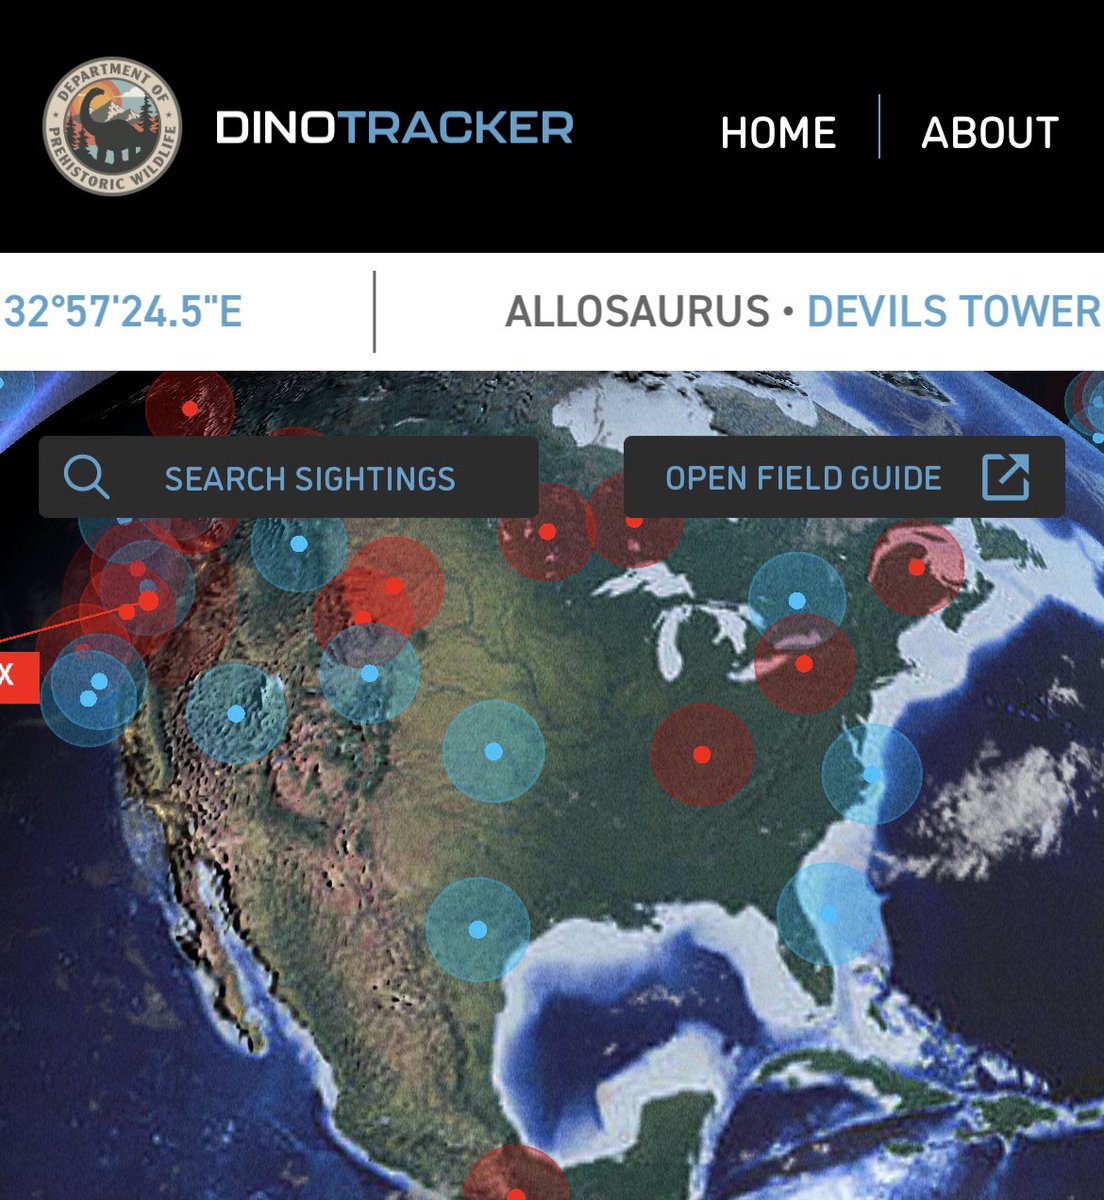 🚨 The in-universe Viral Marketing website for Jurassic World: Dominion, DinoTracker, appears in Jurassic World: Chaos Theory 🚨